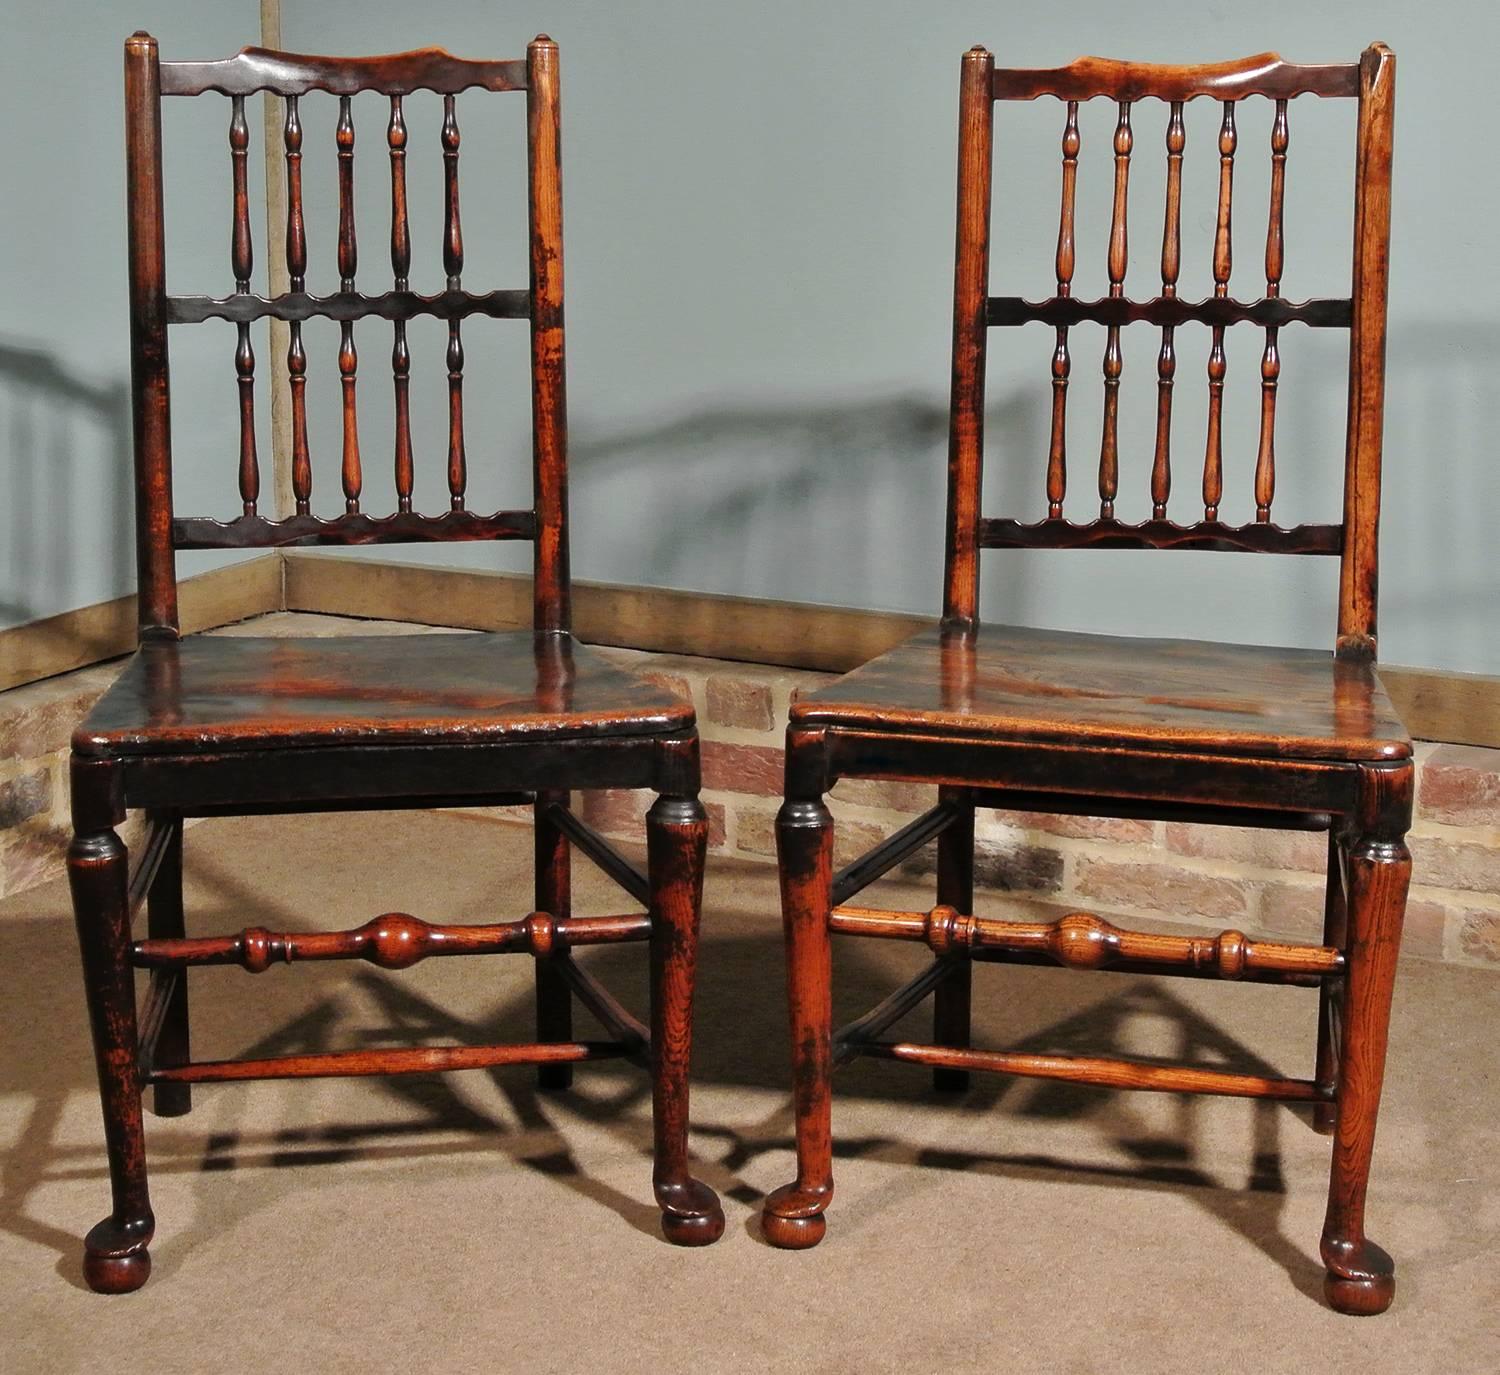 A very good pair of mid-18th century elm spindle back chairs. Of charming form and with a fantastic color and deep natural patination, the chairs are solid and robust and extremely eye-catching.

Original and complete spindles and stretchers, all